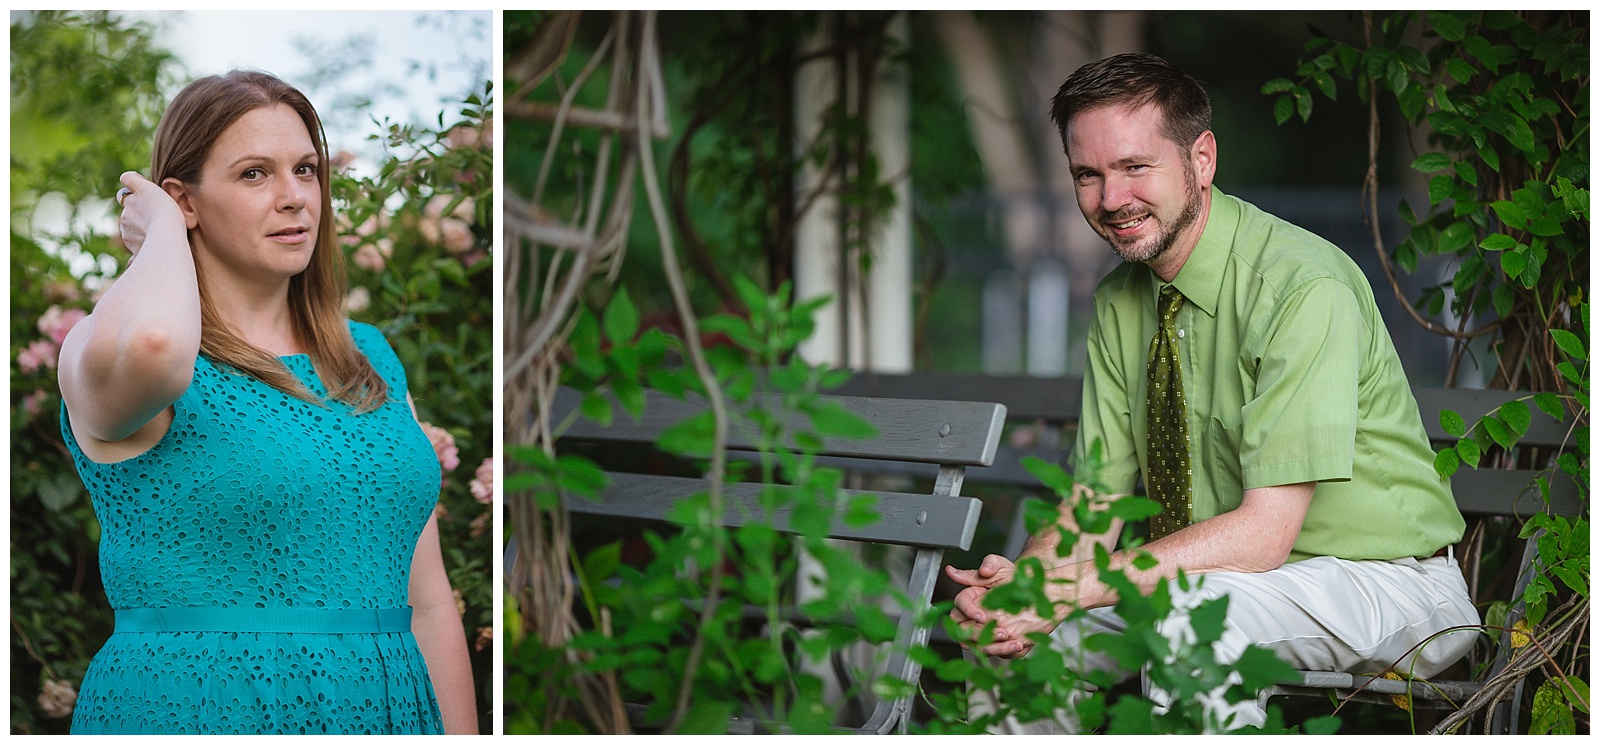 An engagement session at Gage Park in Topeka, Kansas.